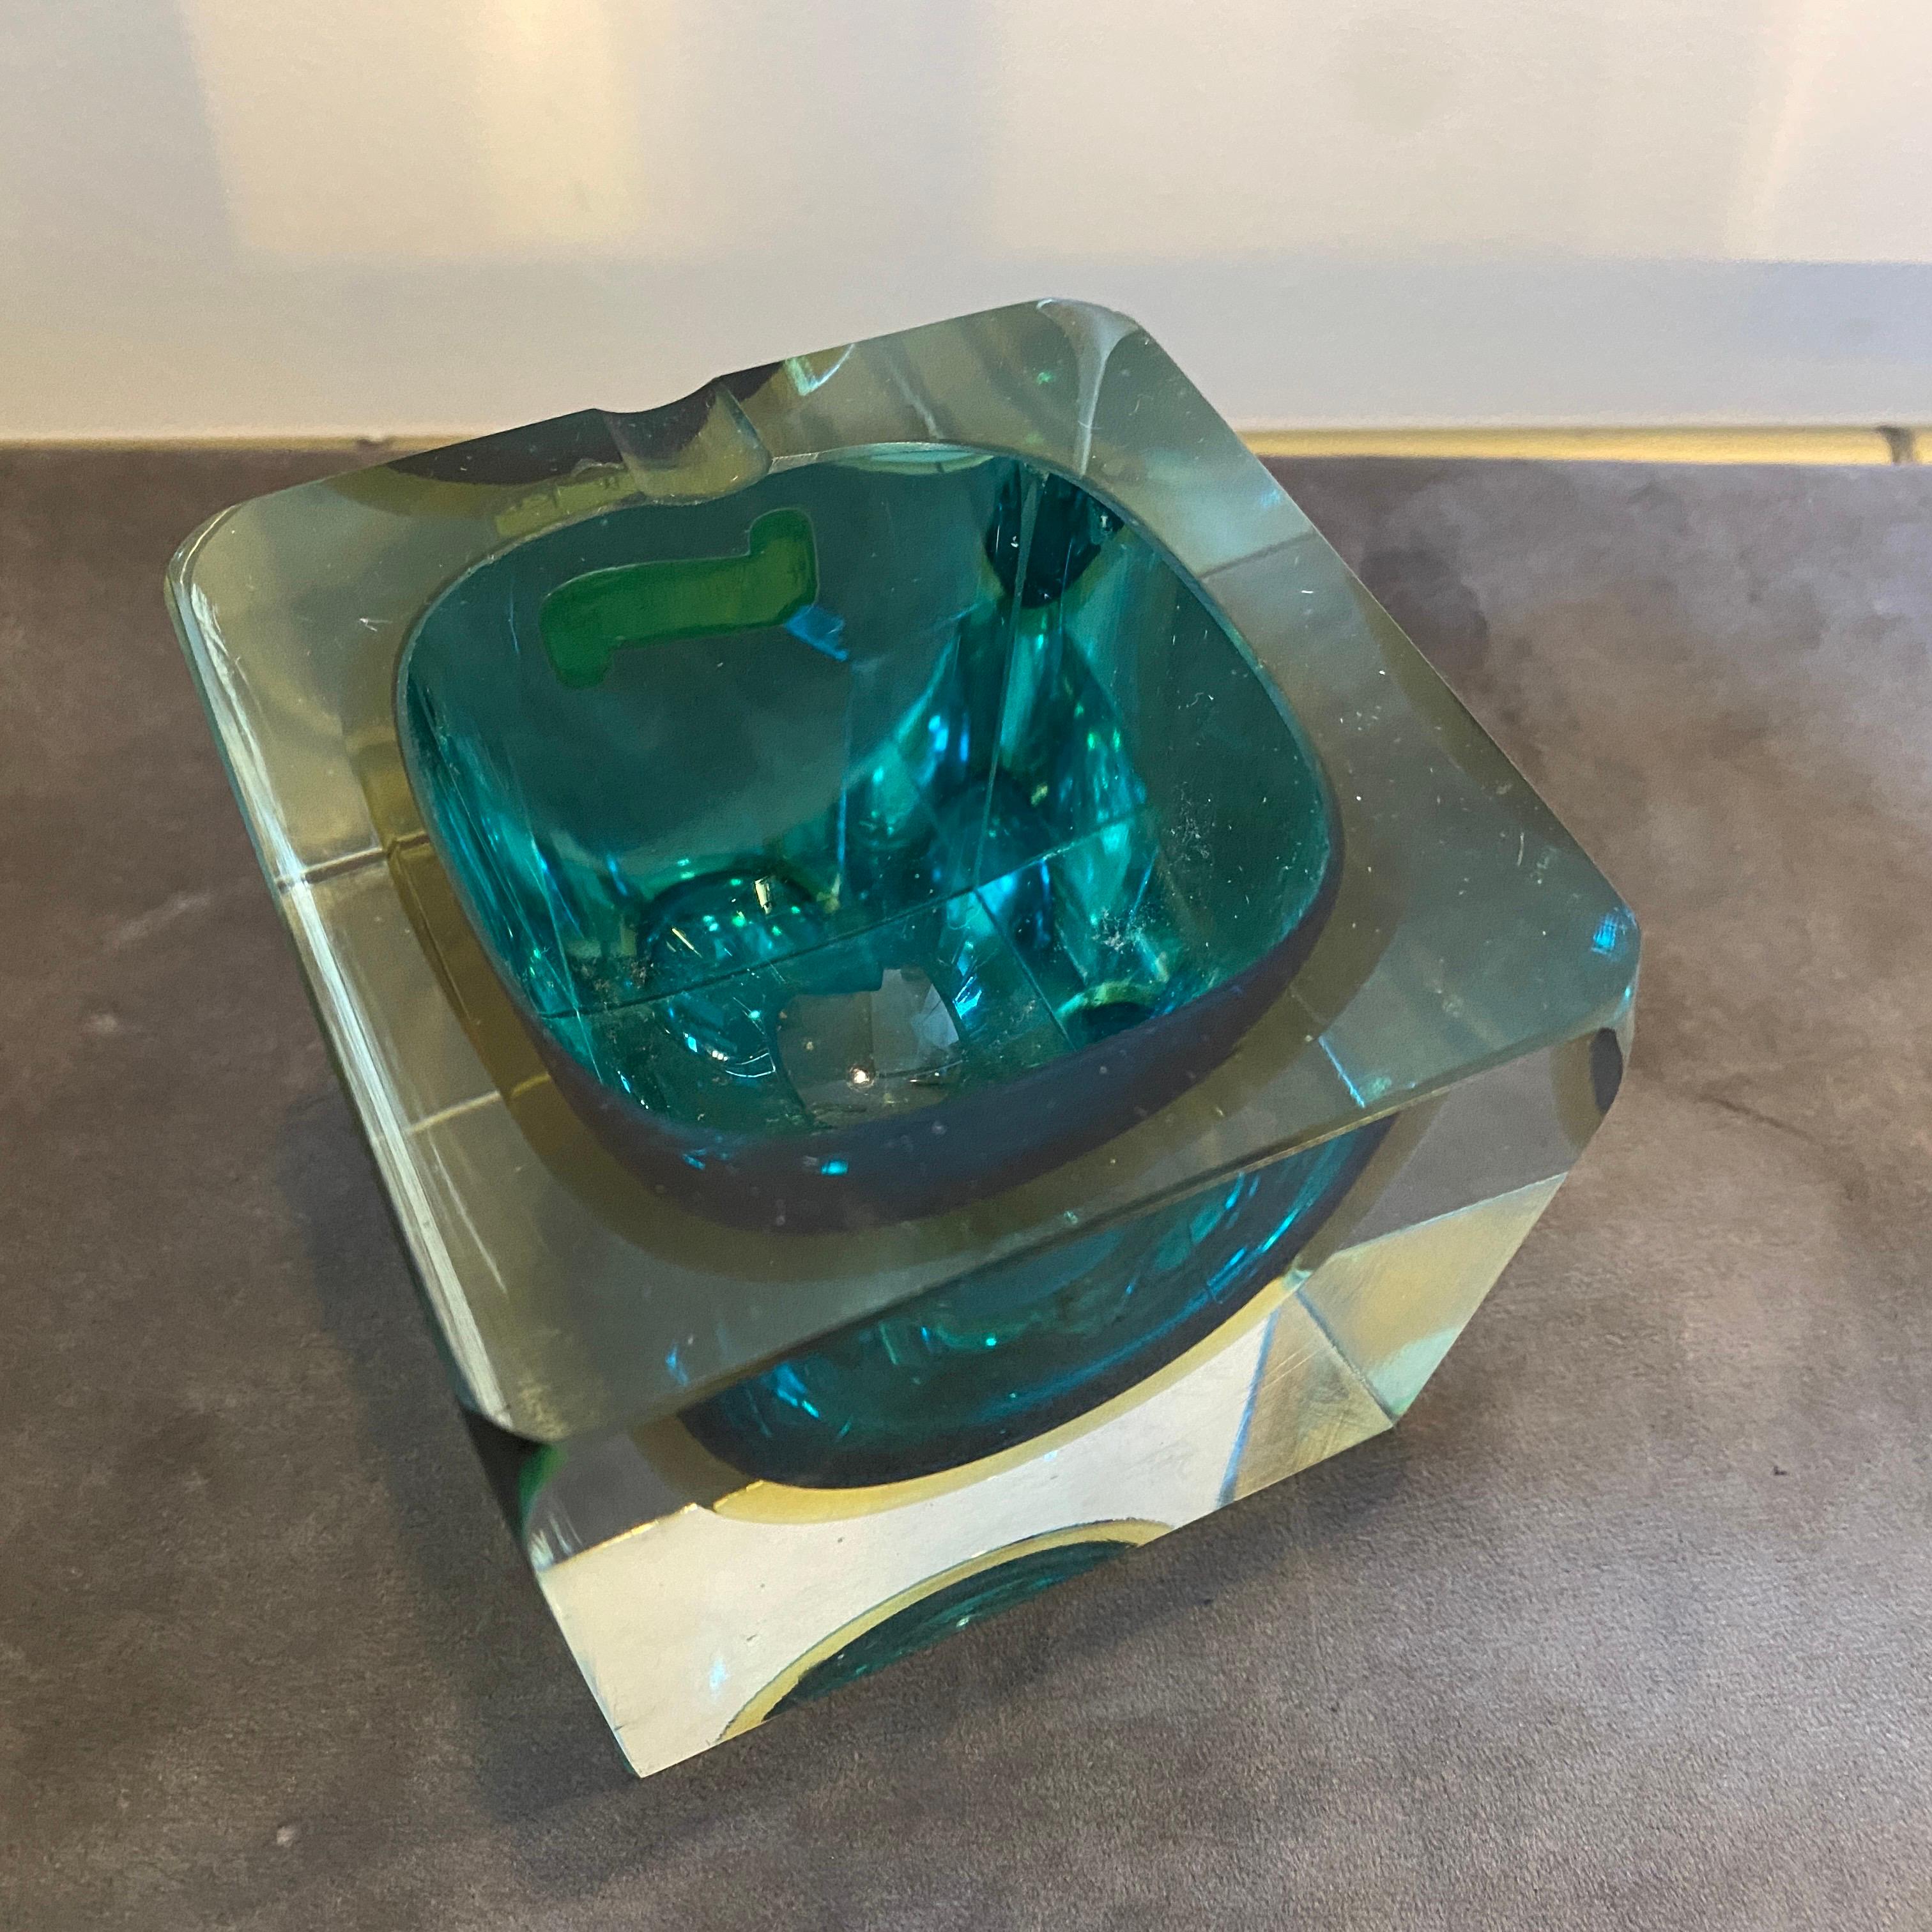 A stylish green and yellow sommerso murano glass ashtray designed and manufactured in Italy in the Seventies by Mandruzzato. It's in perfect conditions.